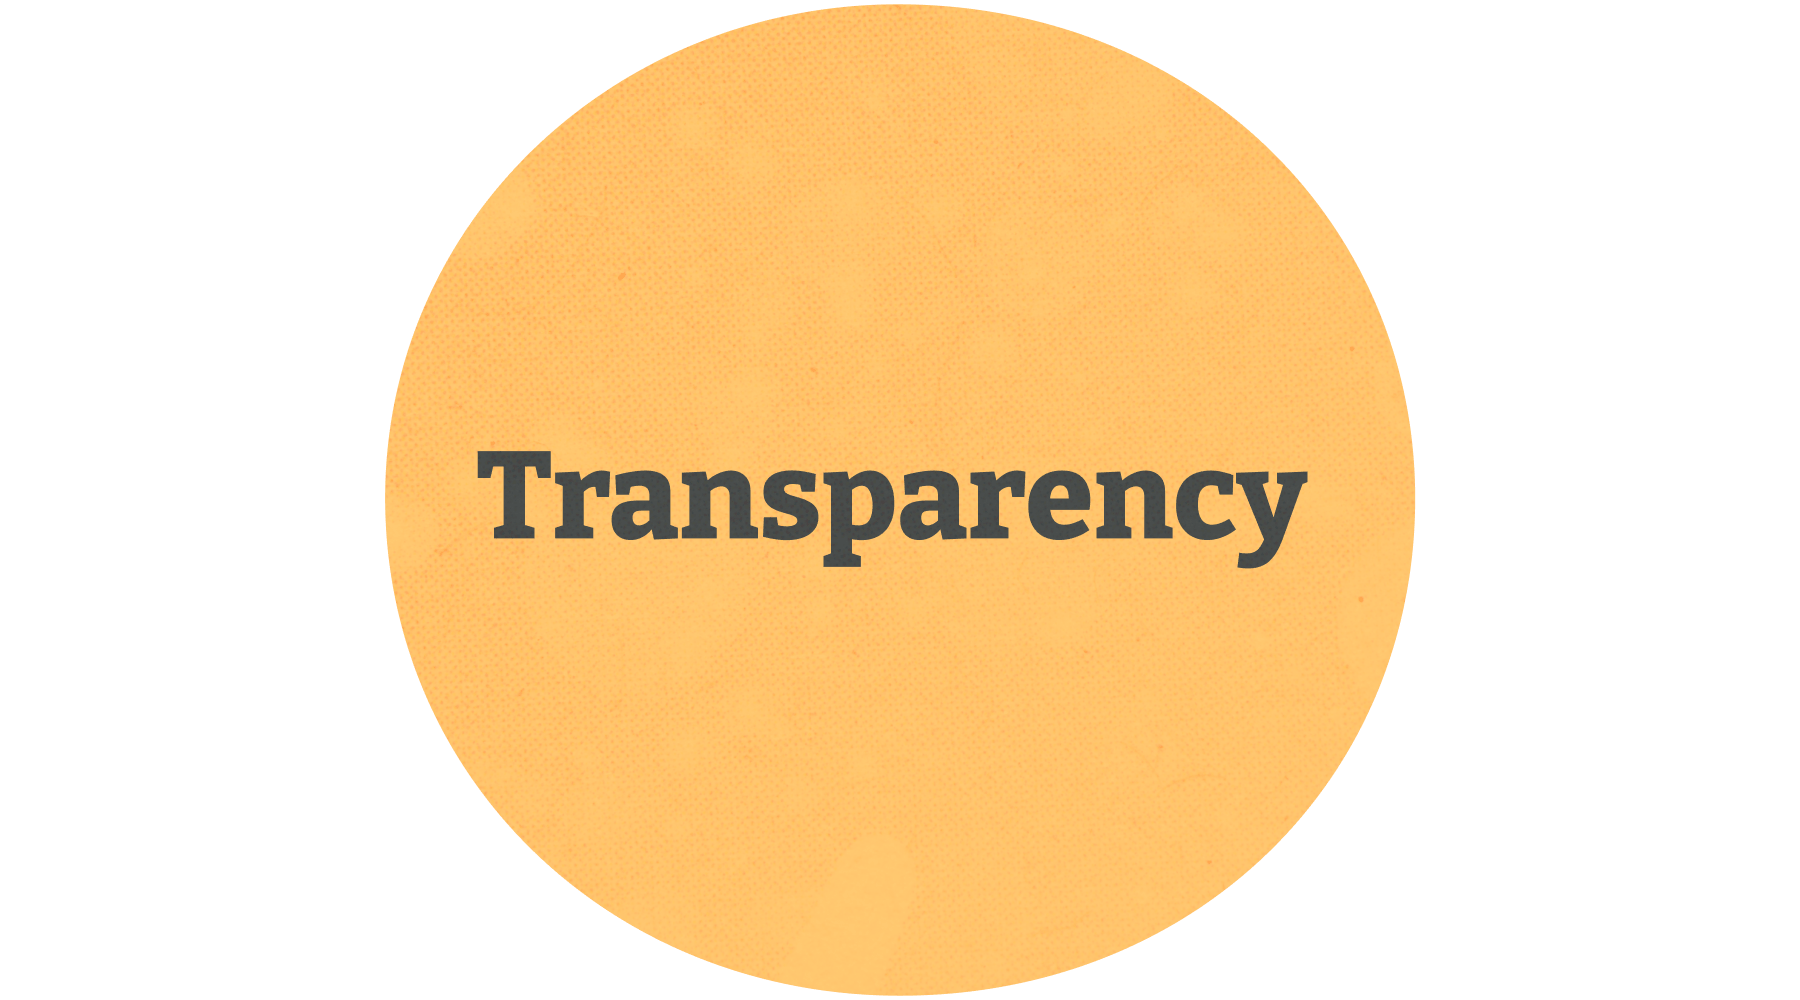 orange circle with the word "transparency" written in the middle in black text